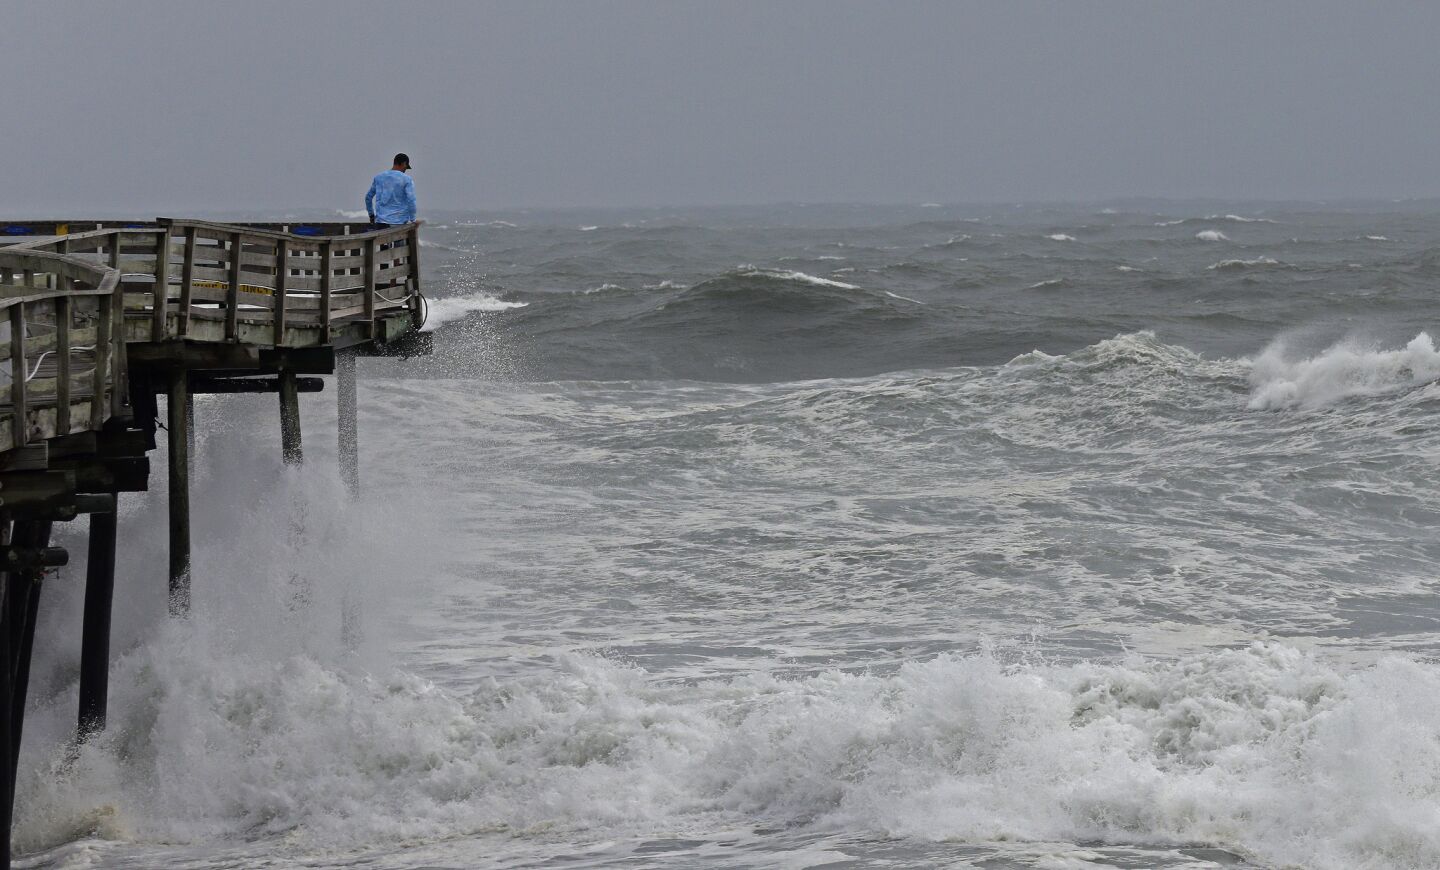 An onlooker checks out the heavy surf at the Avalon Fishing Pier in Kill Devil Hills, N.C., Thursday, Sept. 13, 2018 as Hurricane Florence approaches the east coast.